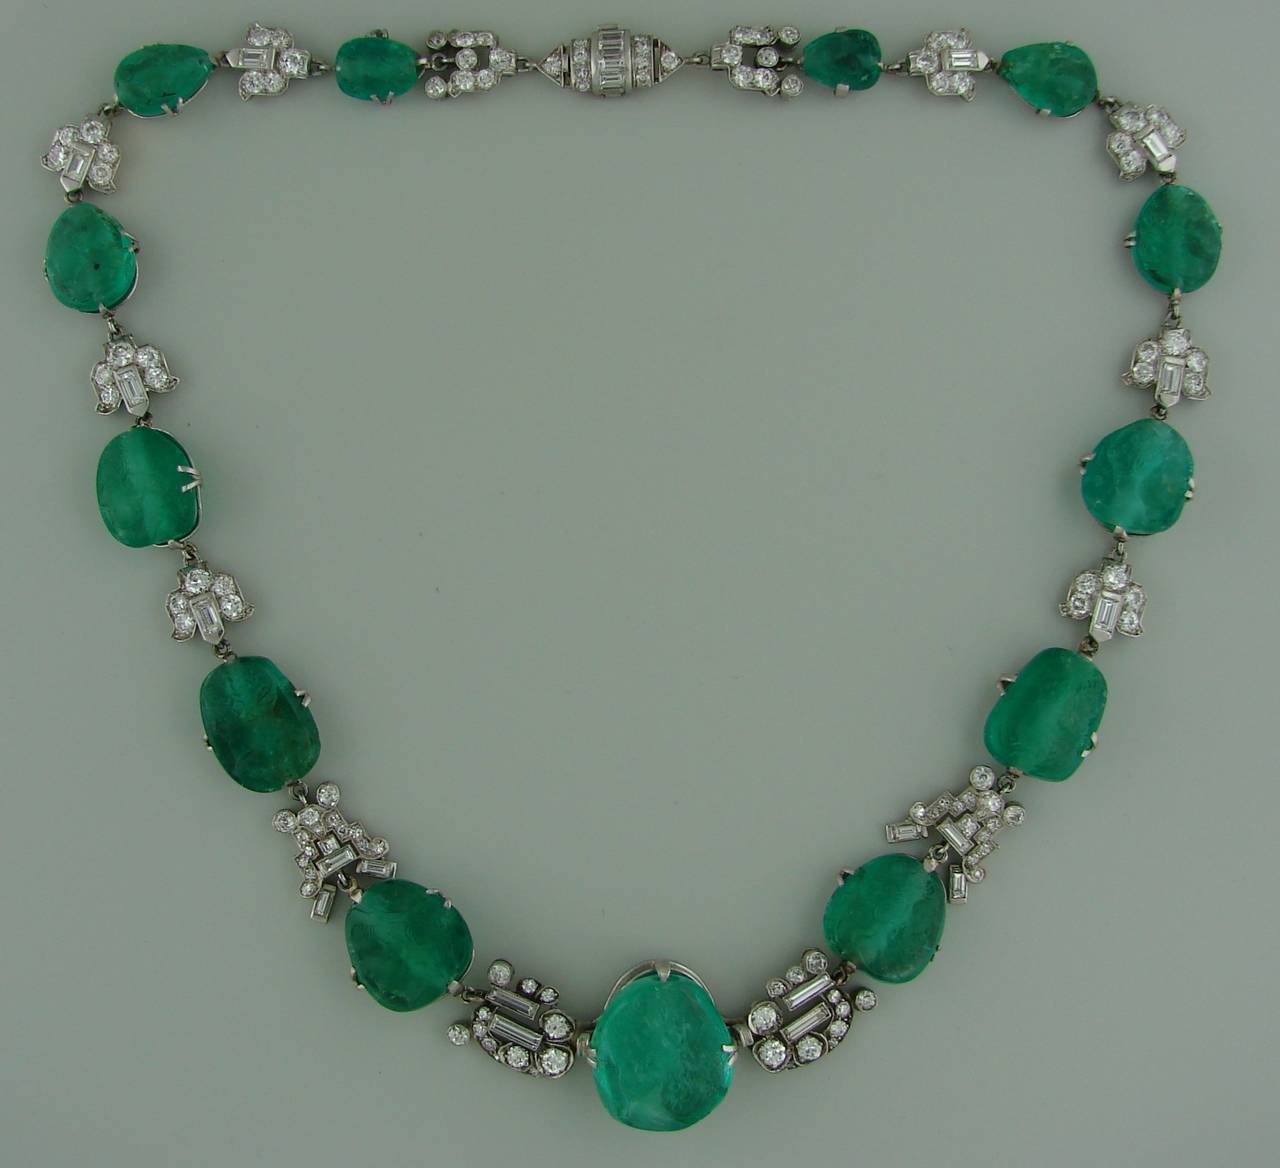 Stunning Art Deco set featuring sixteen carved emeralds set in platinum and accented with Old European cut and baguette cut diamonds. 
The necklace has thirteen graduating drilled carved emeralds, the center one measures 15.24 x 16.97 x 10.12 mm and